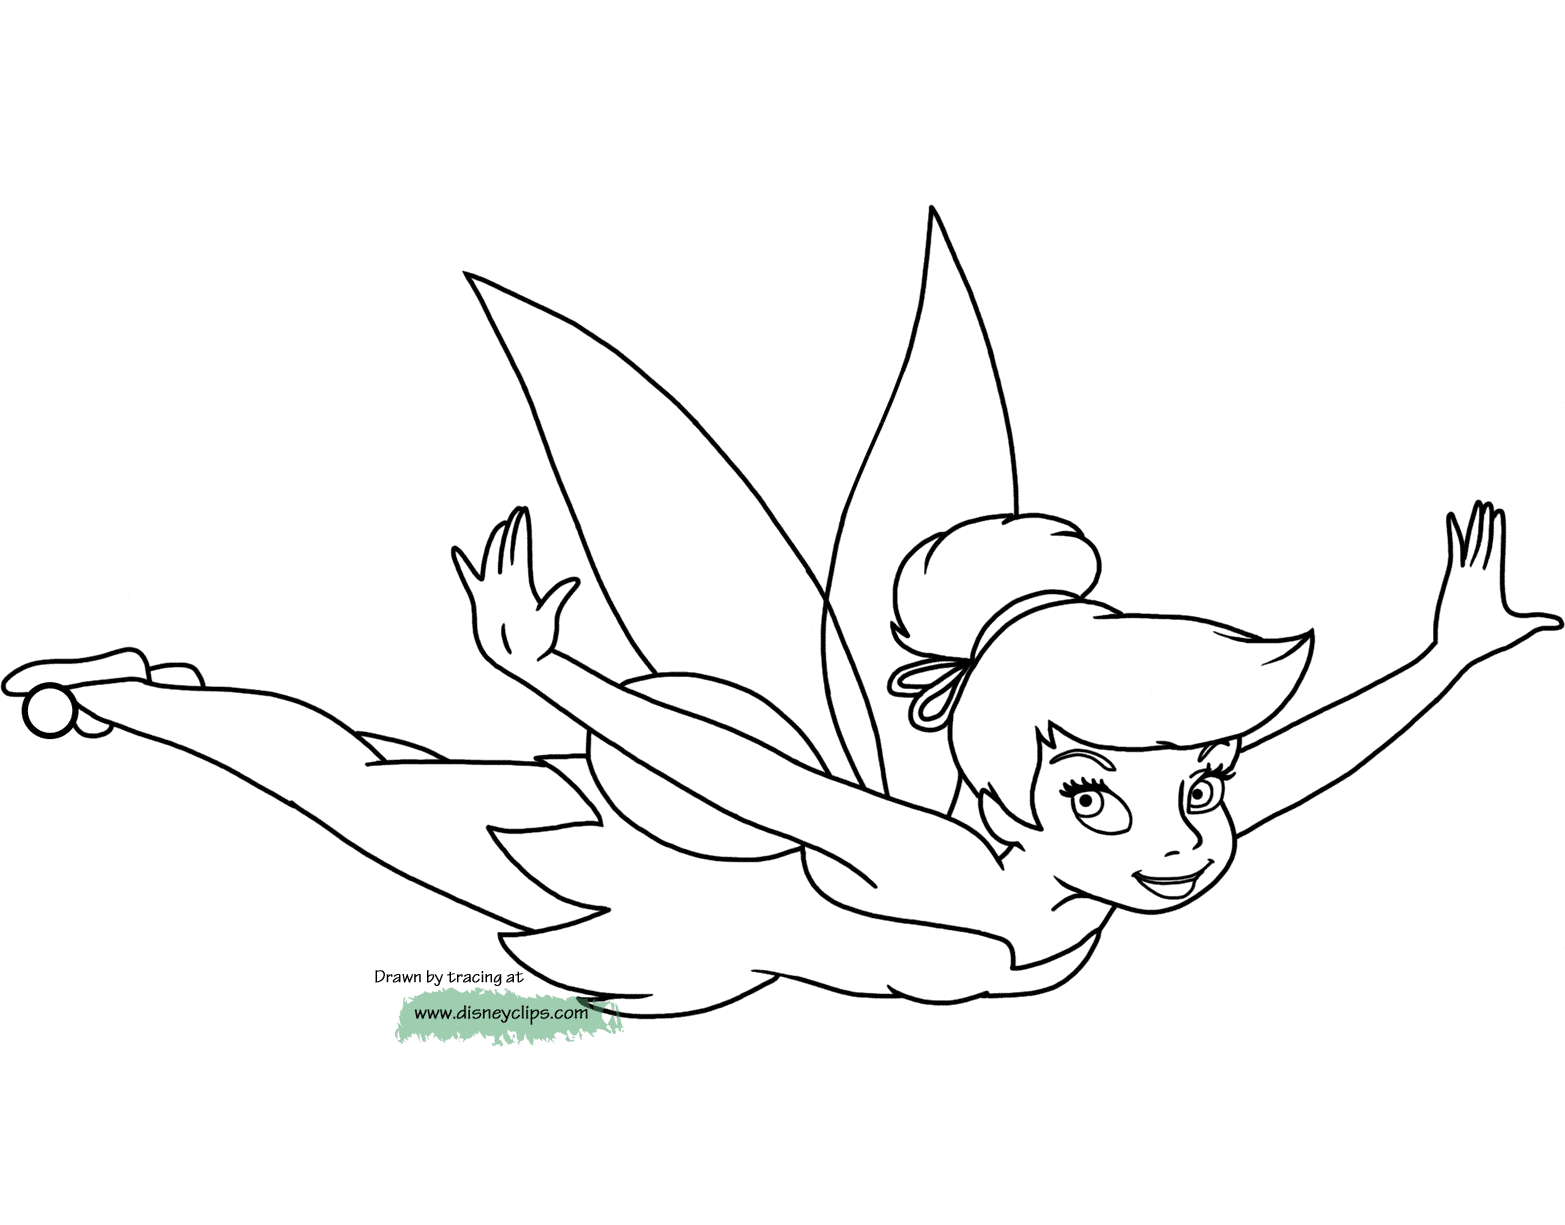 Disney Fairies Tinker Bell Printable Coloring Pages | Disney Coloring Book